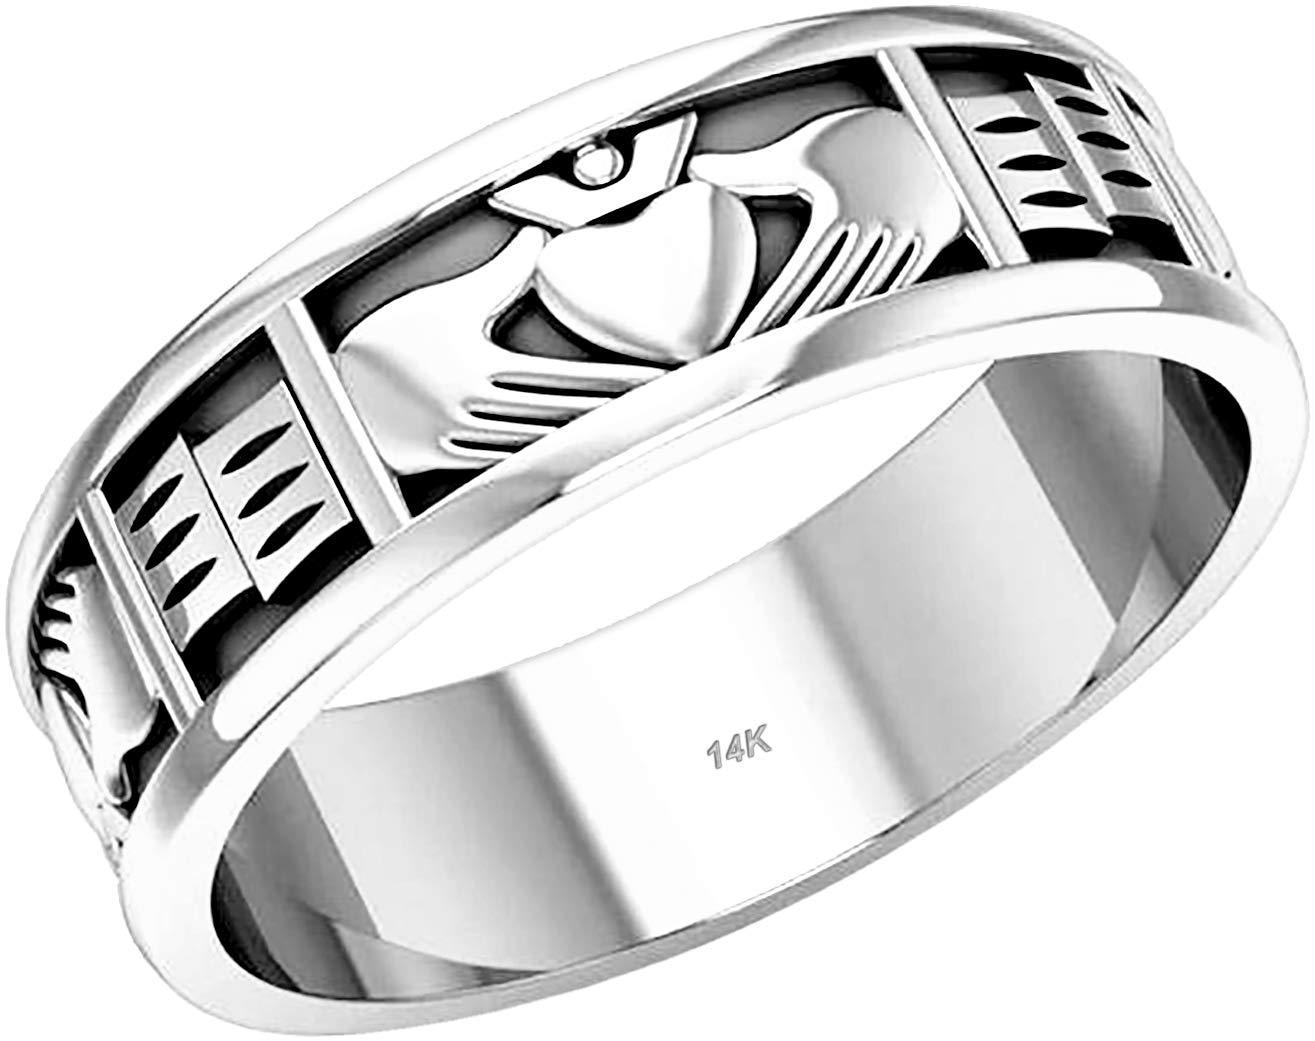 White Gold Irish Claddagh Wedding Ring Band For Her